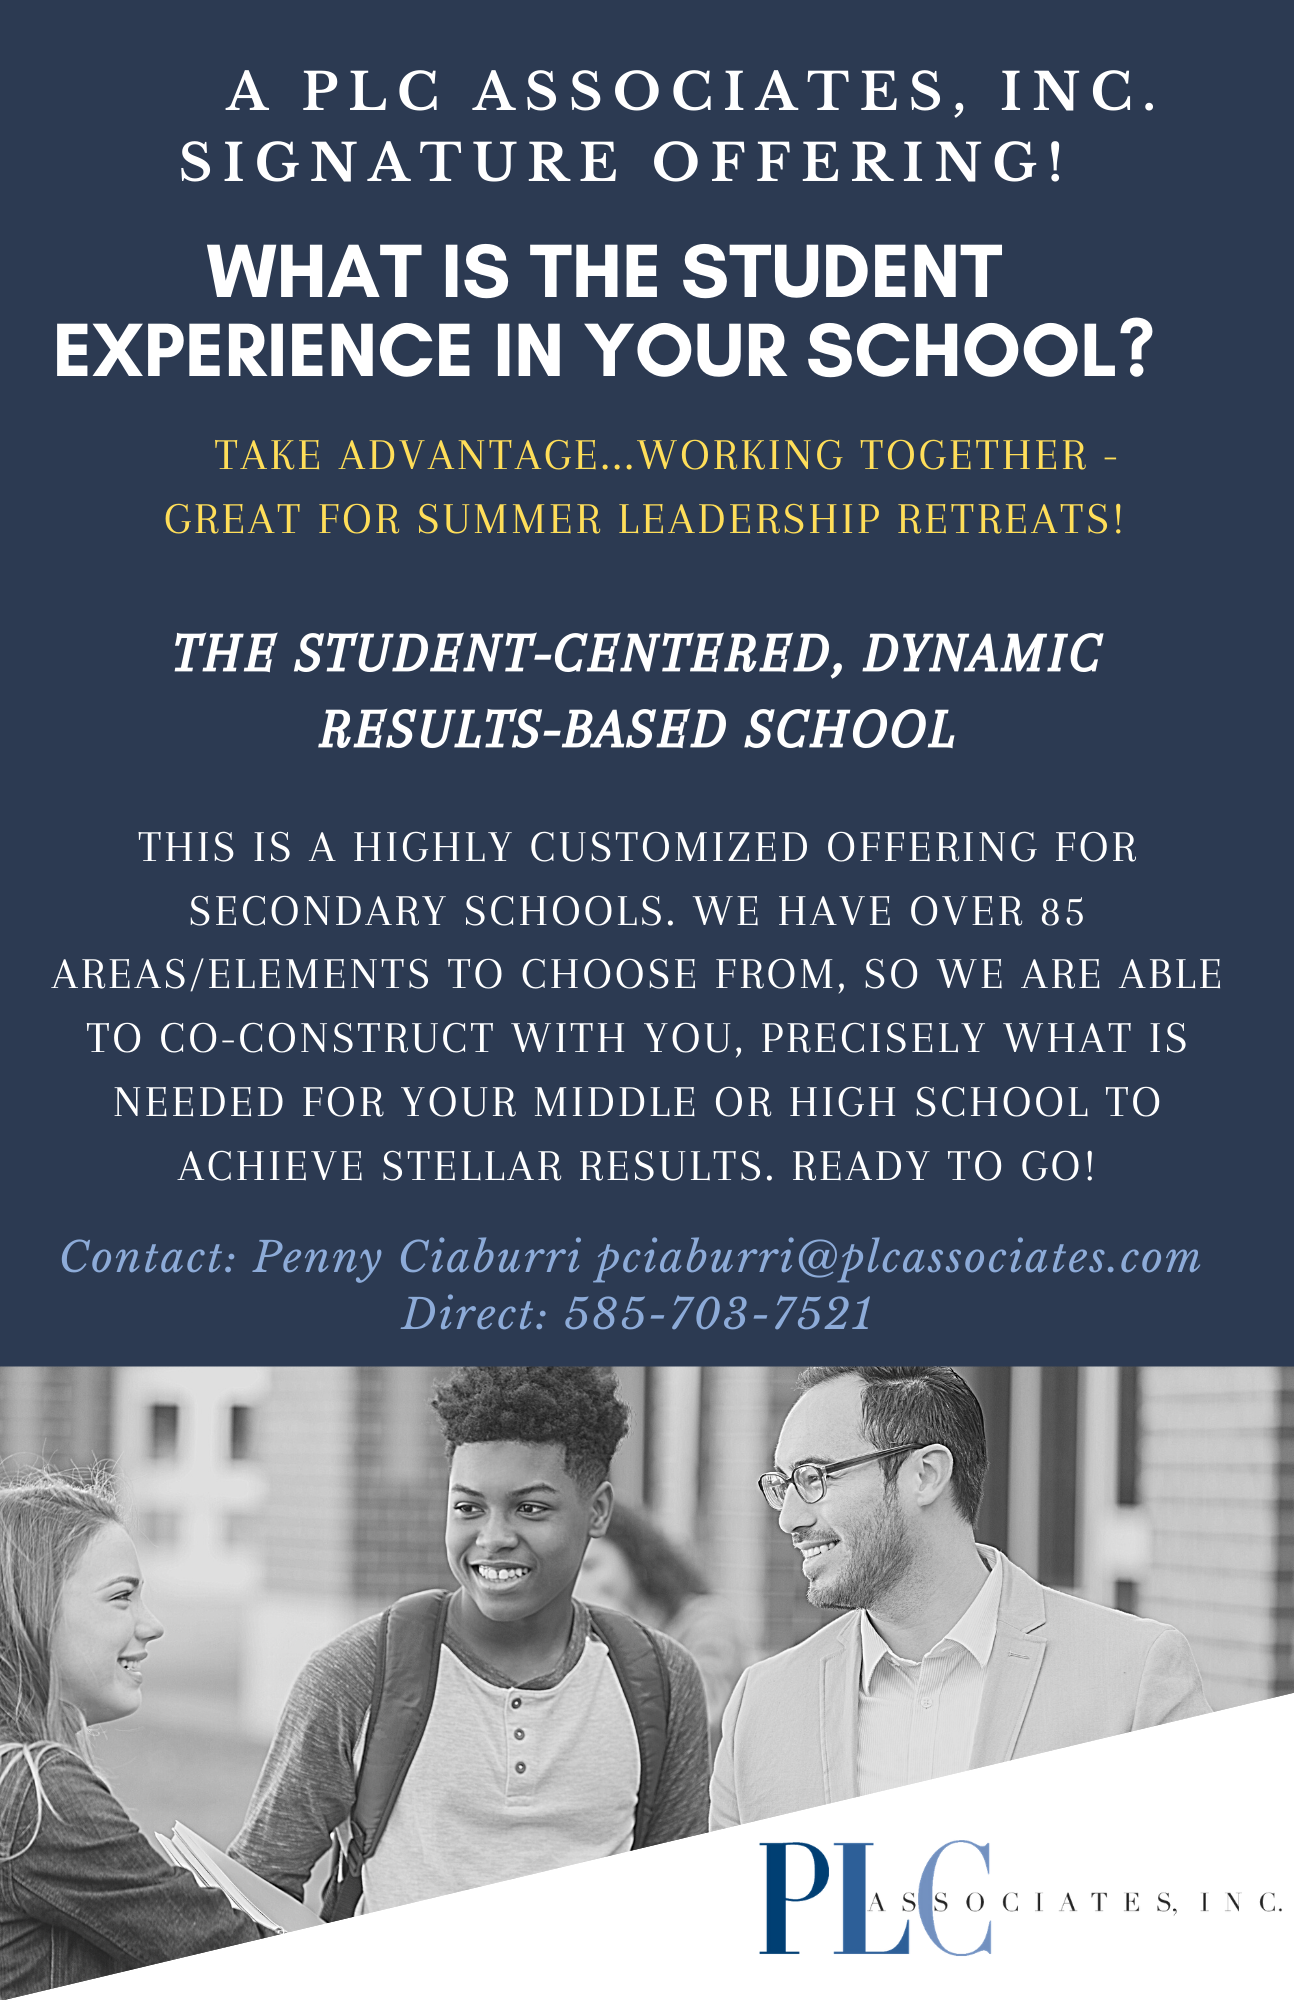 The Student-Centered, Dynamic, Results-Based, Secondary School